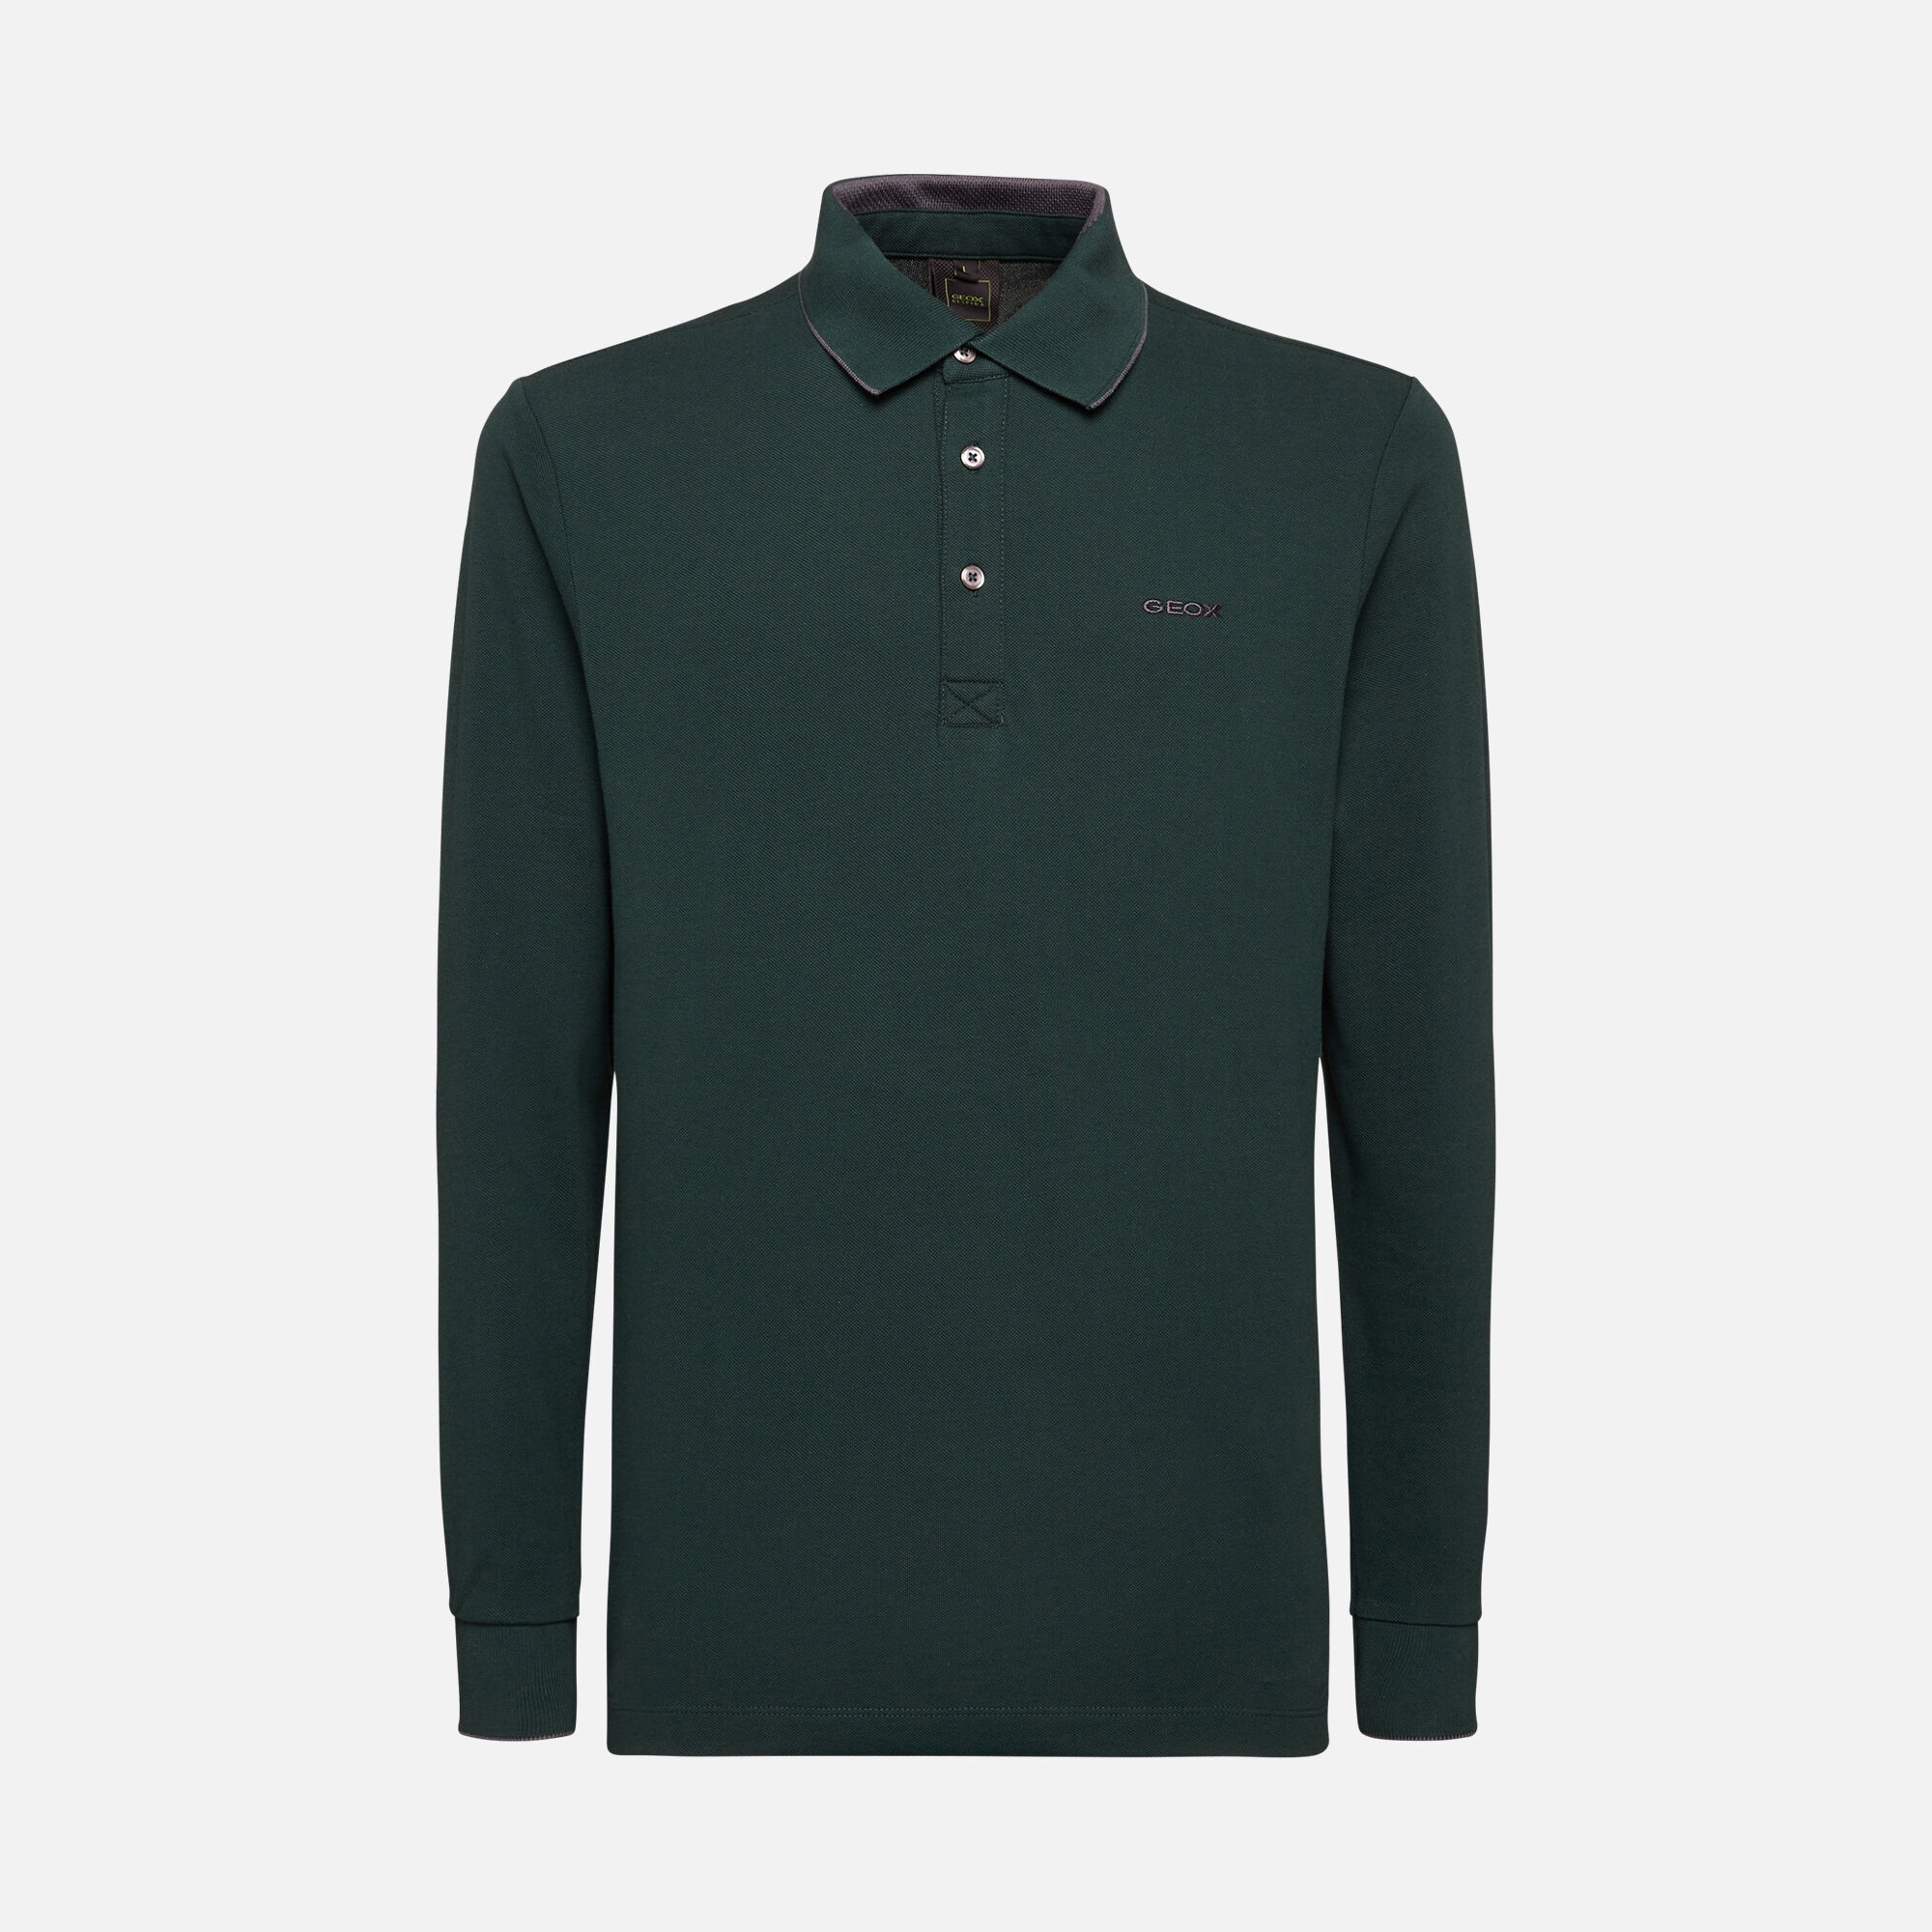 Geox SUSTAINABLE Man: Green Polo | Geox® Polo